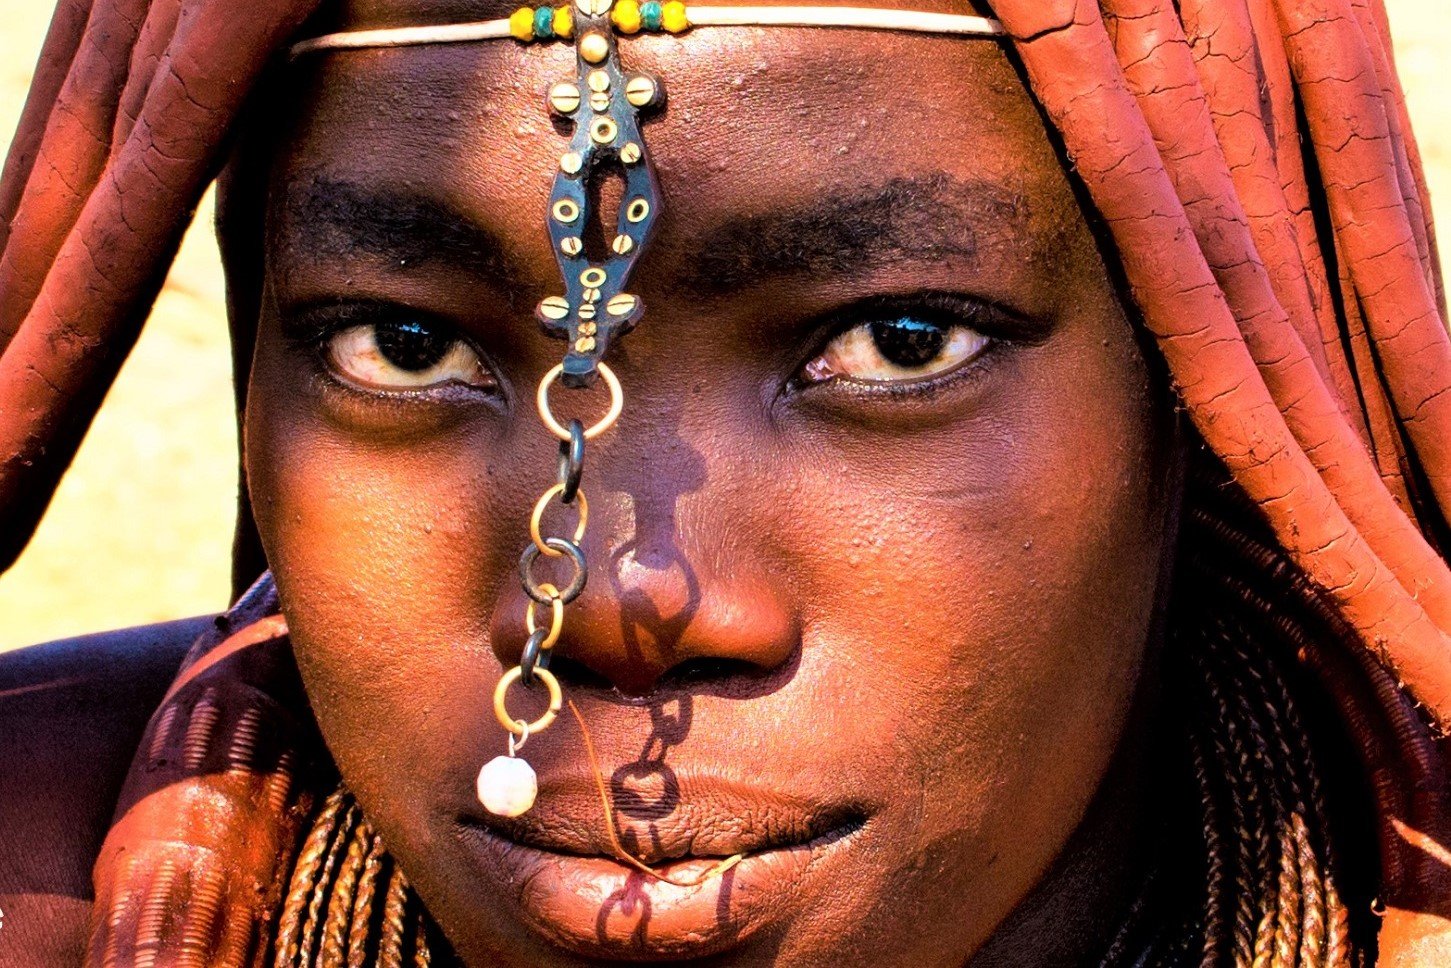 How to visit Himba people in Opuwo